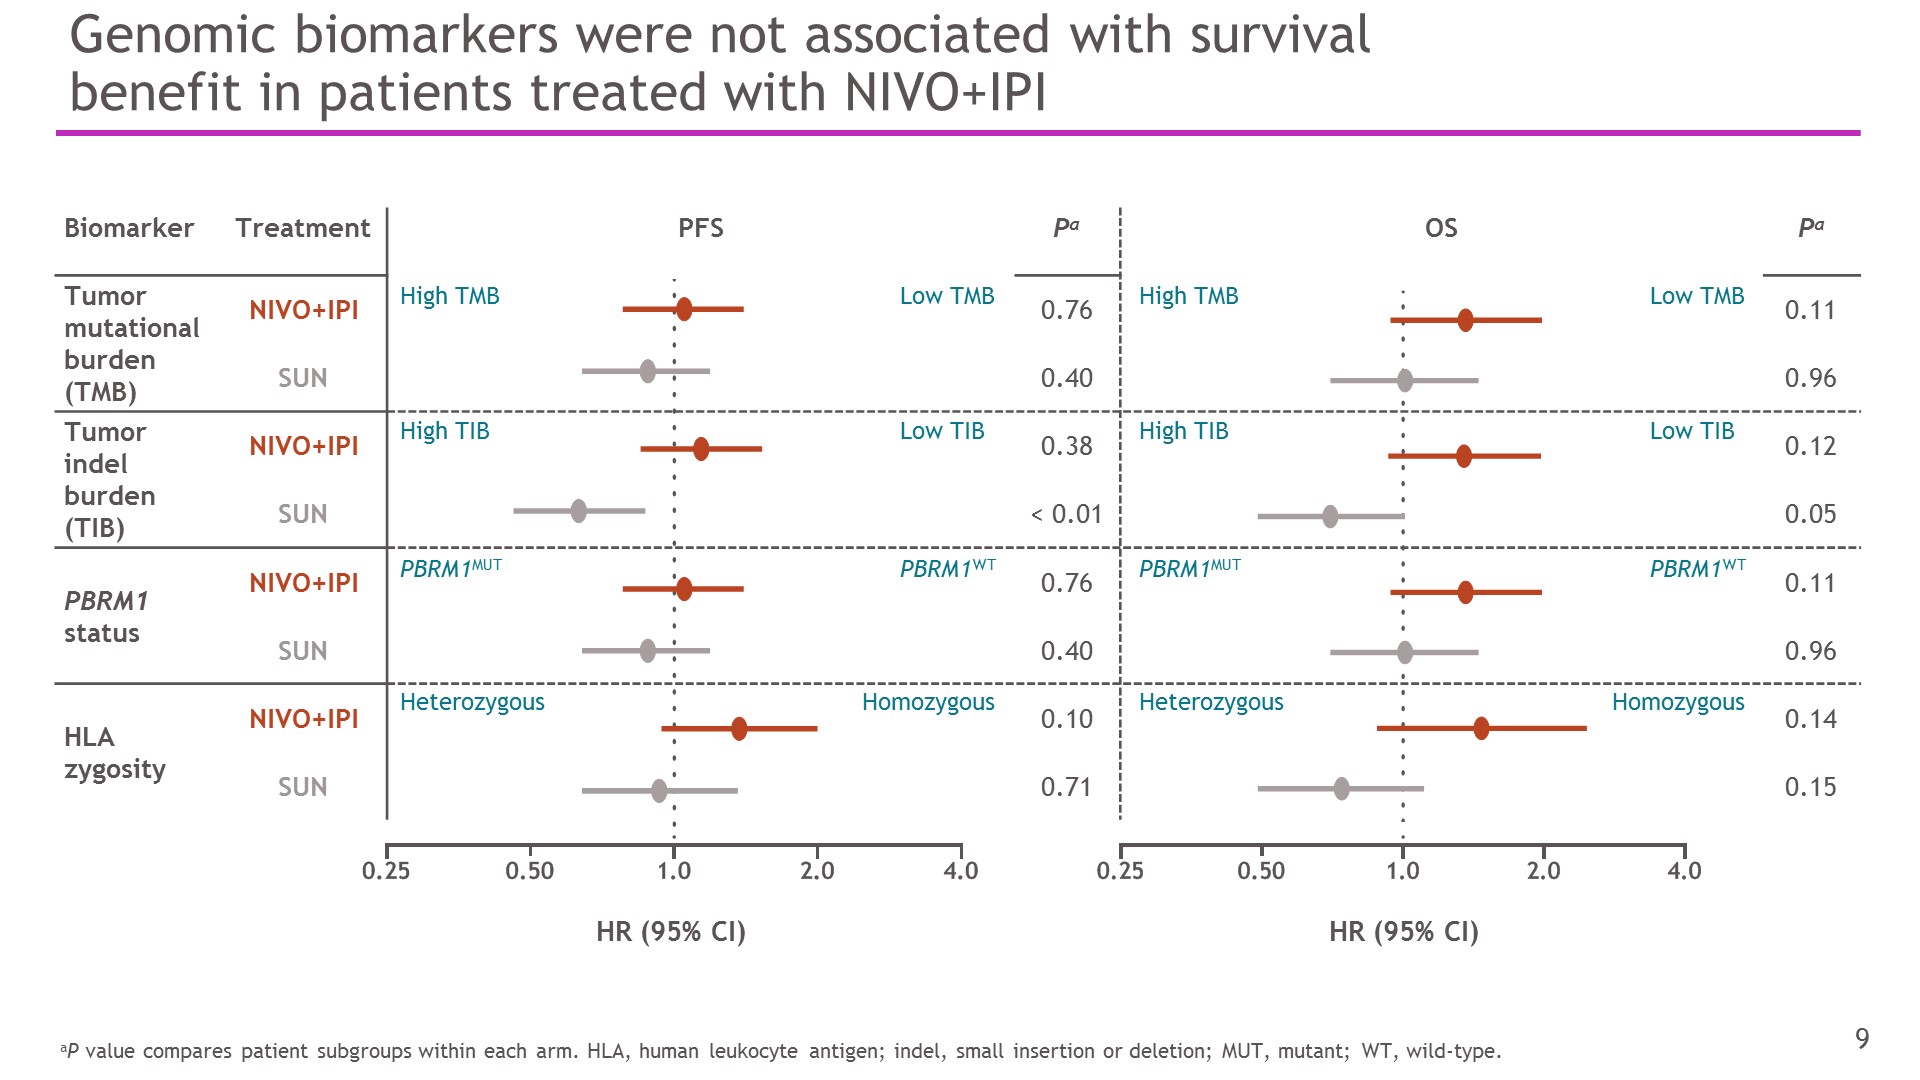 genomic biomarkers were not associated with survival benefits